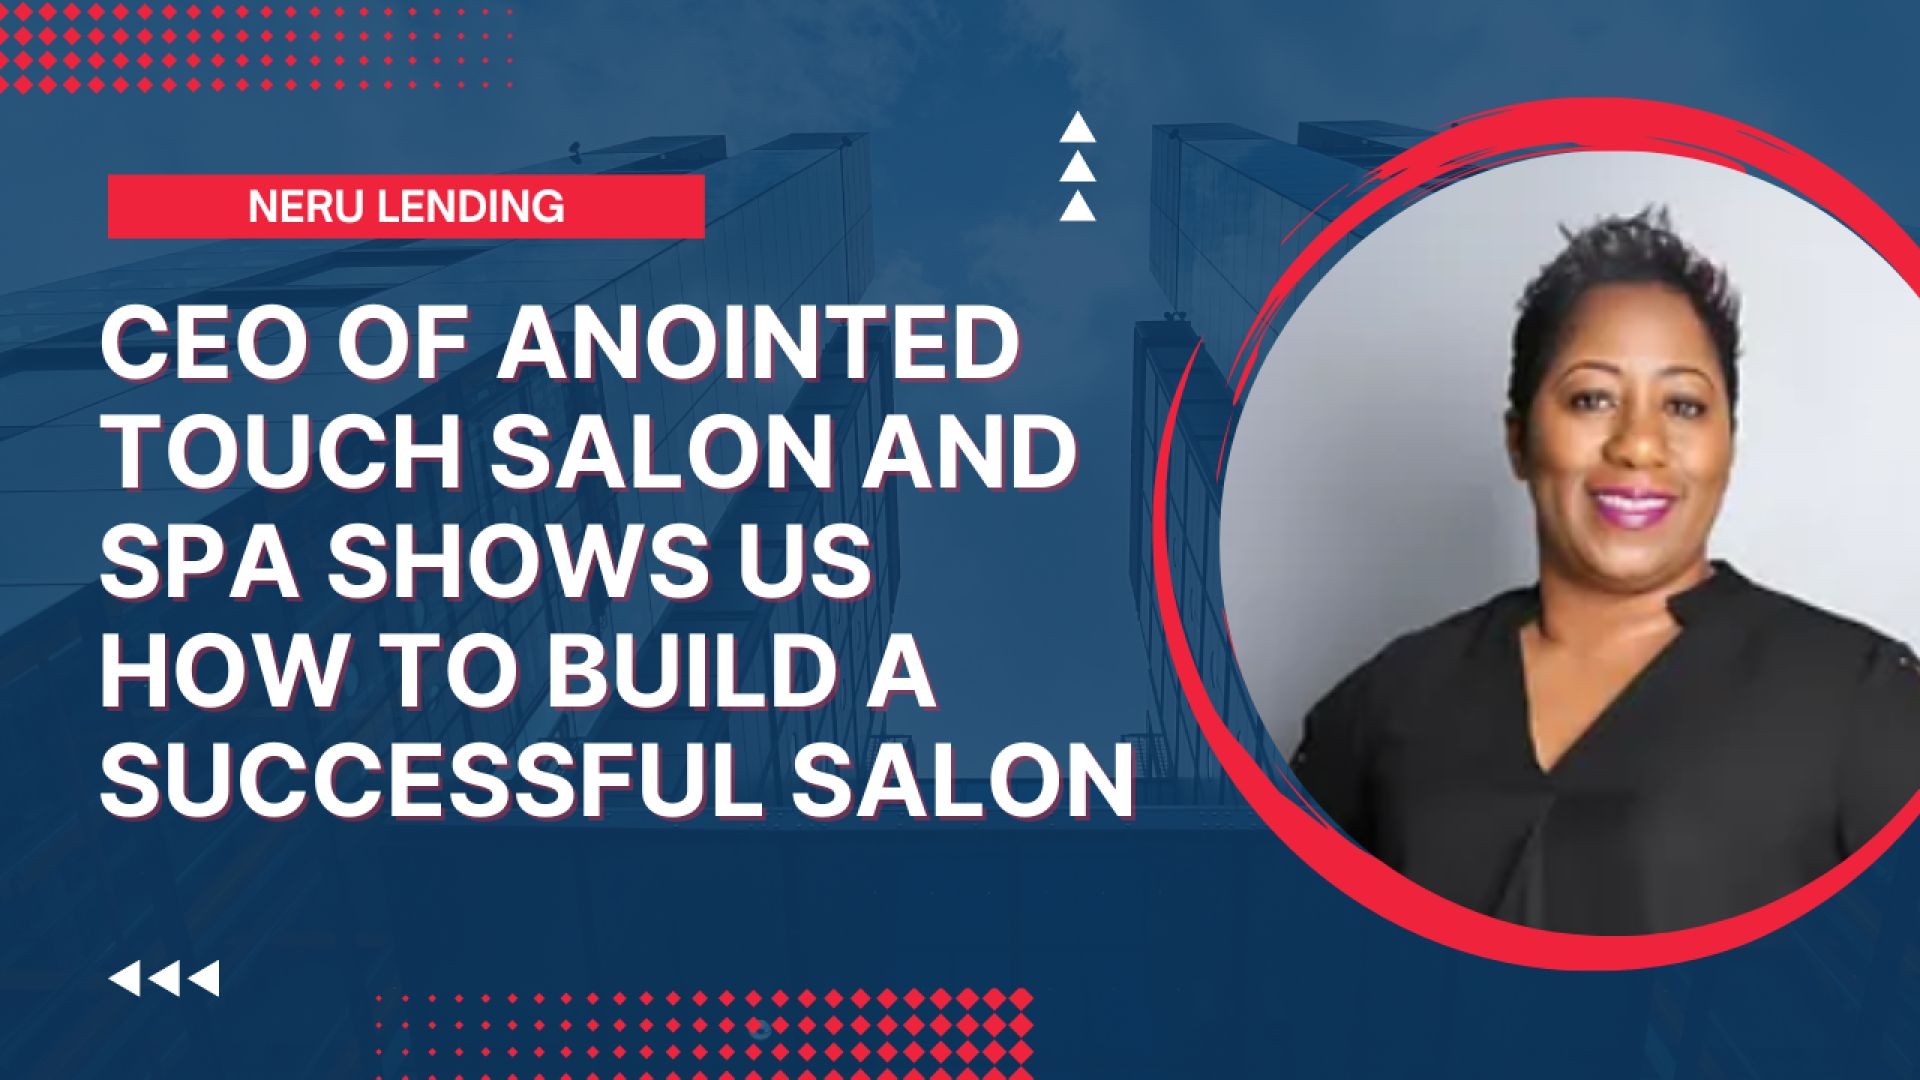 CEO Of Anointed Touch Salon and Spa Shows Us How To Build A Successful Salon